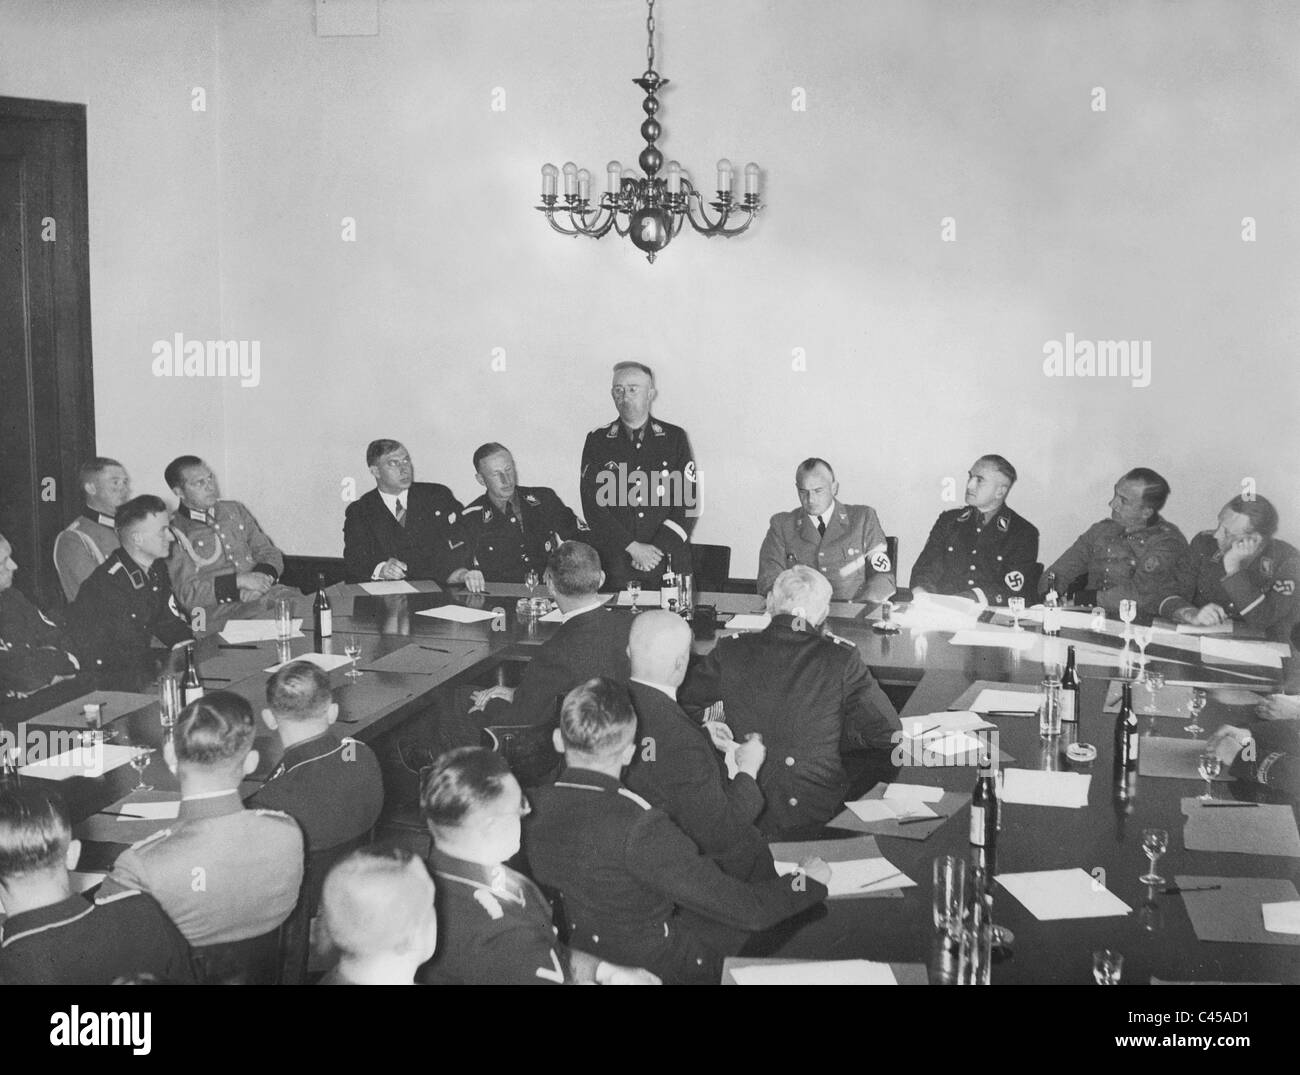 Police Law Committee with Himmler, Stuckardt, Heydrich, Himmler, Frank, Best, Daluege, Helldorf Stock Photo